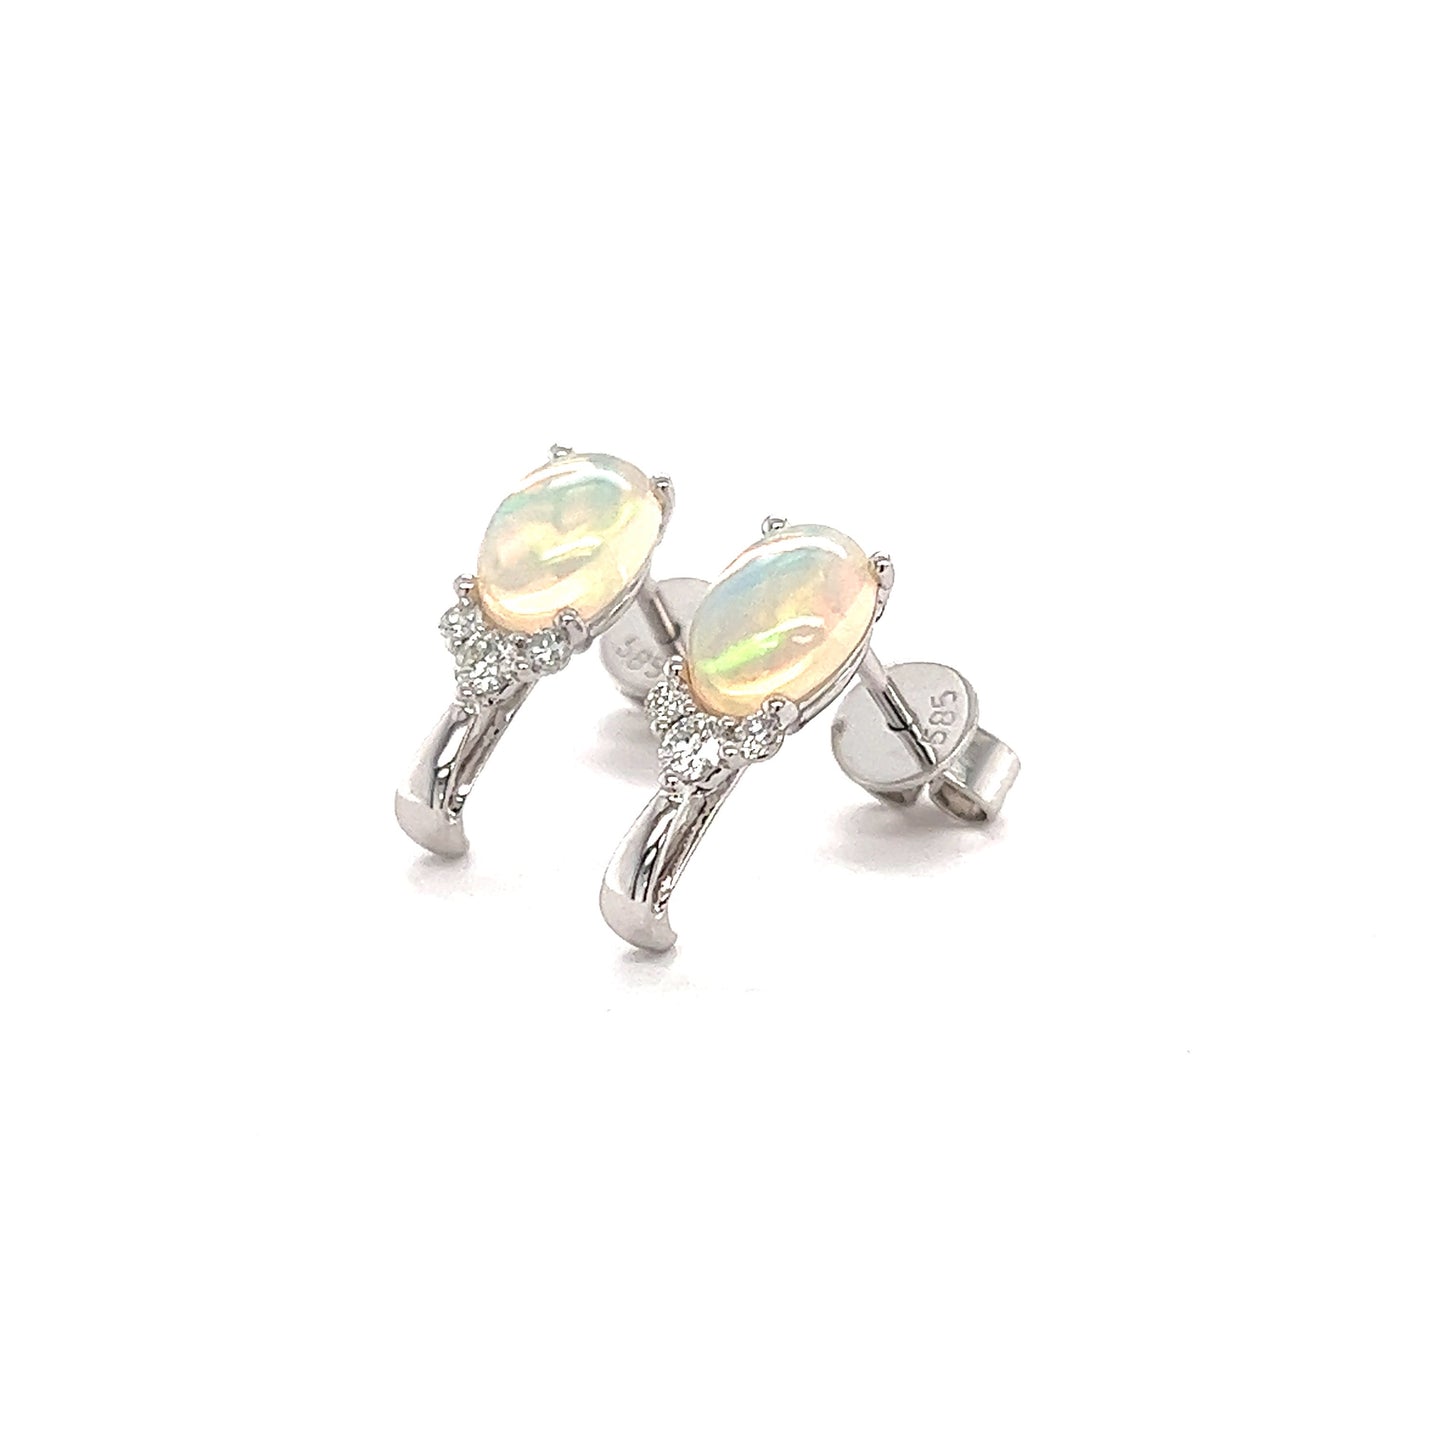 White Ethiopian Opal Stud Earrings with Accent Diamonds in 14K White Gold Right Side View